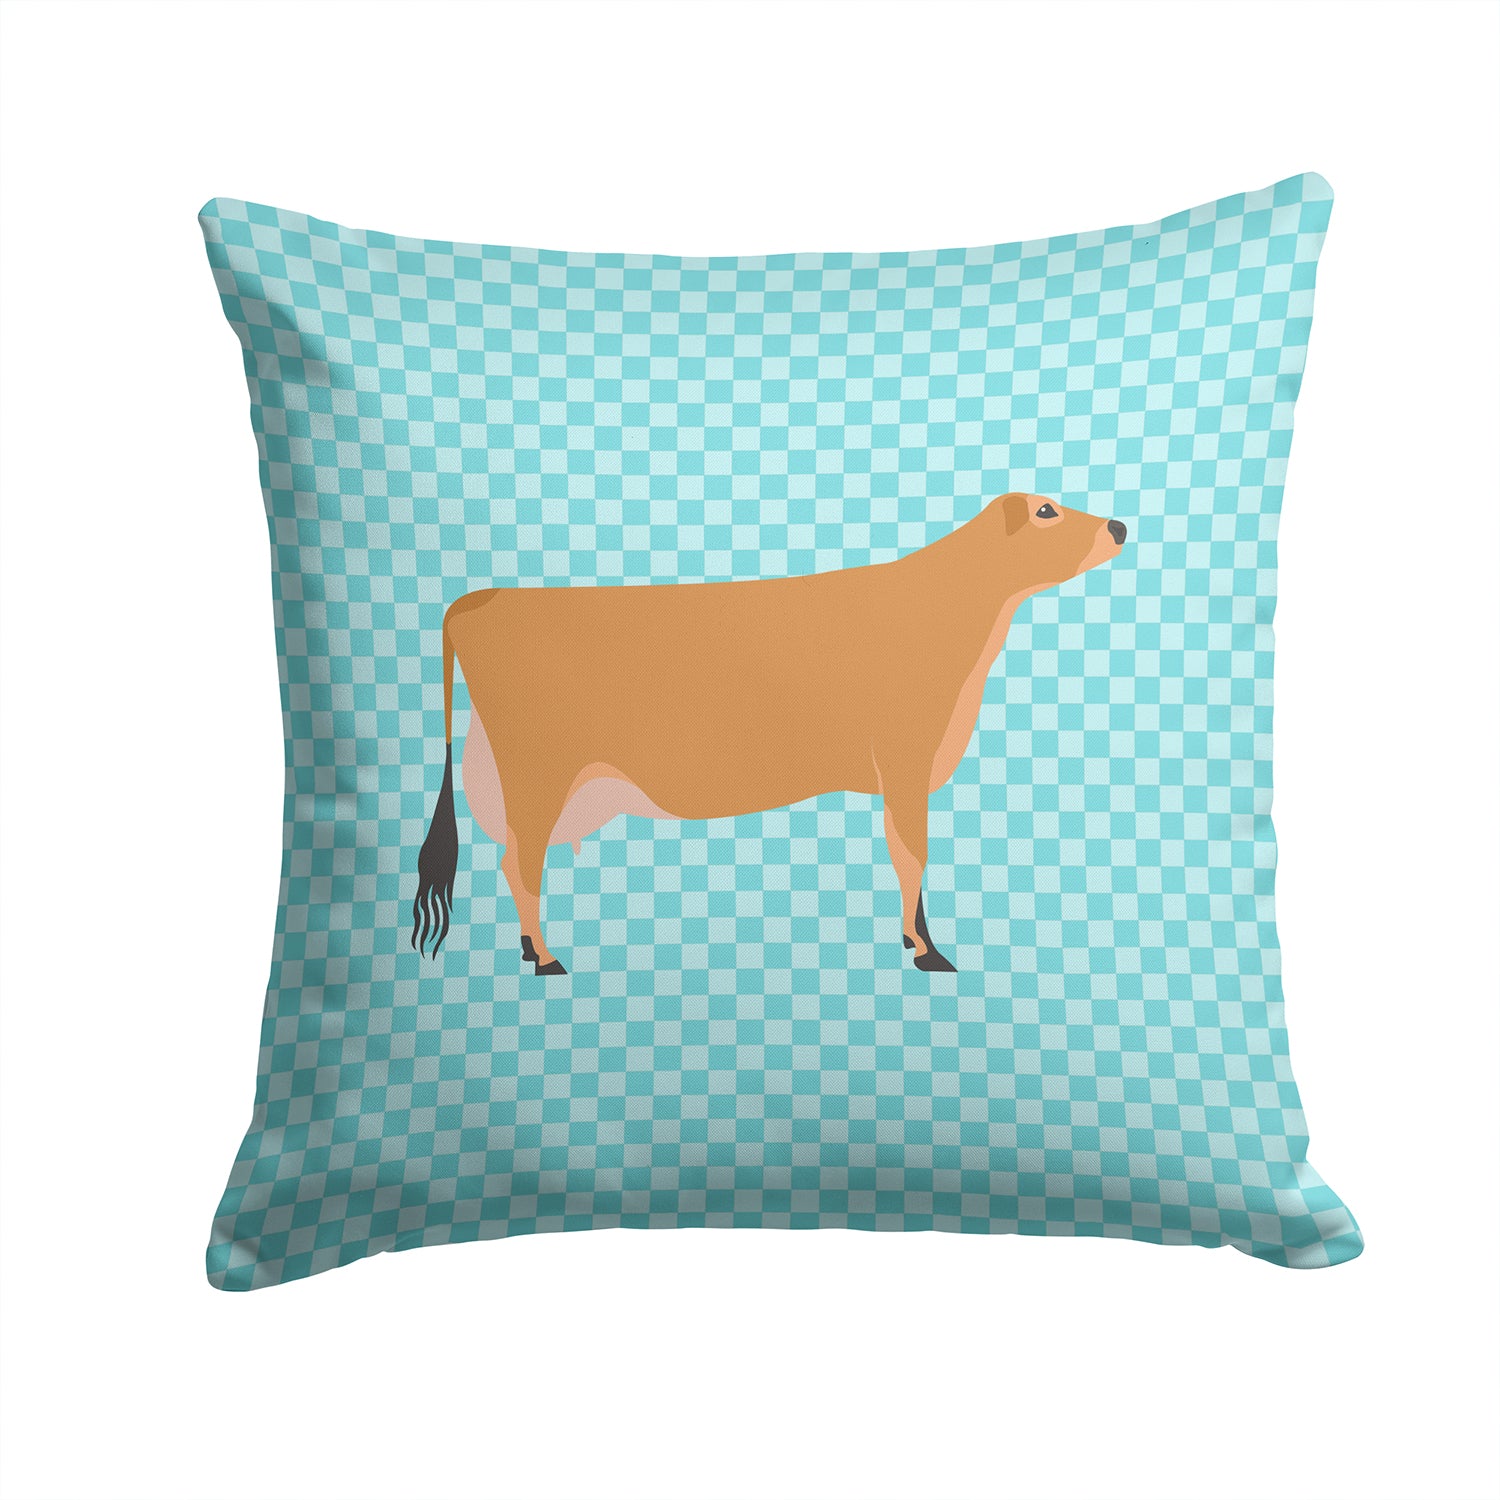 Jersey Cow Blue Check Fabric Decorative Pillow BB8003PW1414 - the-store.com